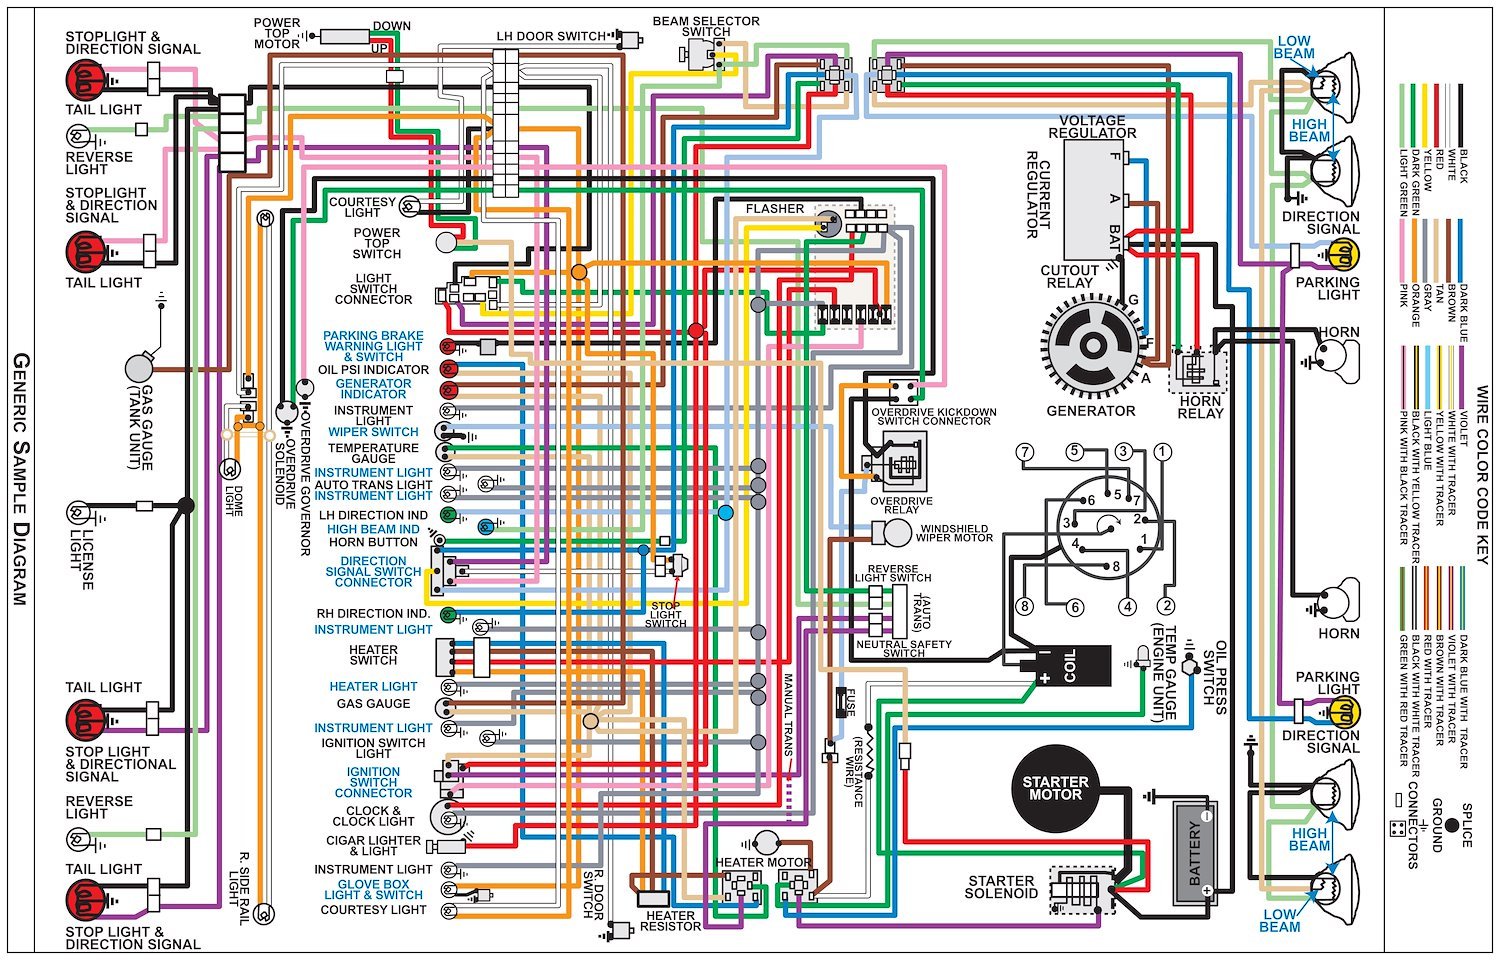 Wiring Diagram for 1973 Ford F-Series Truck, 11 in x 17 in., Laminated